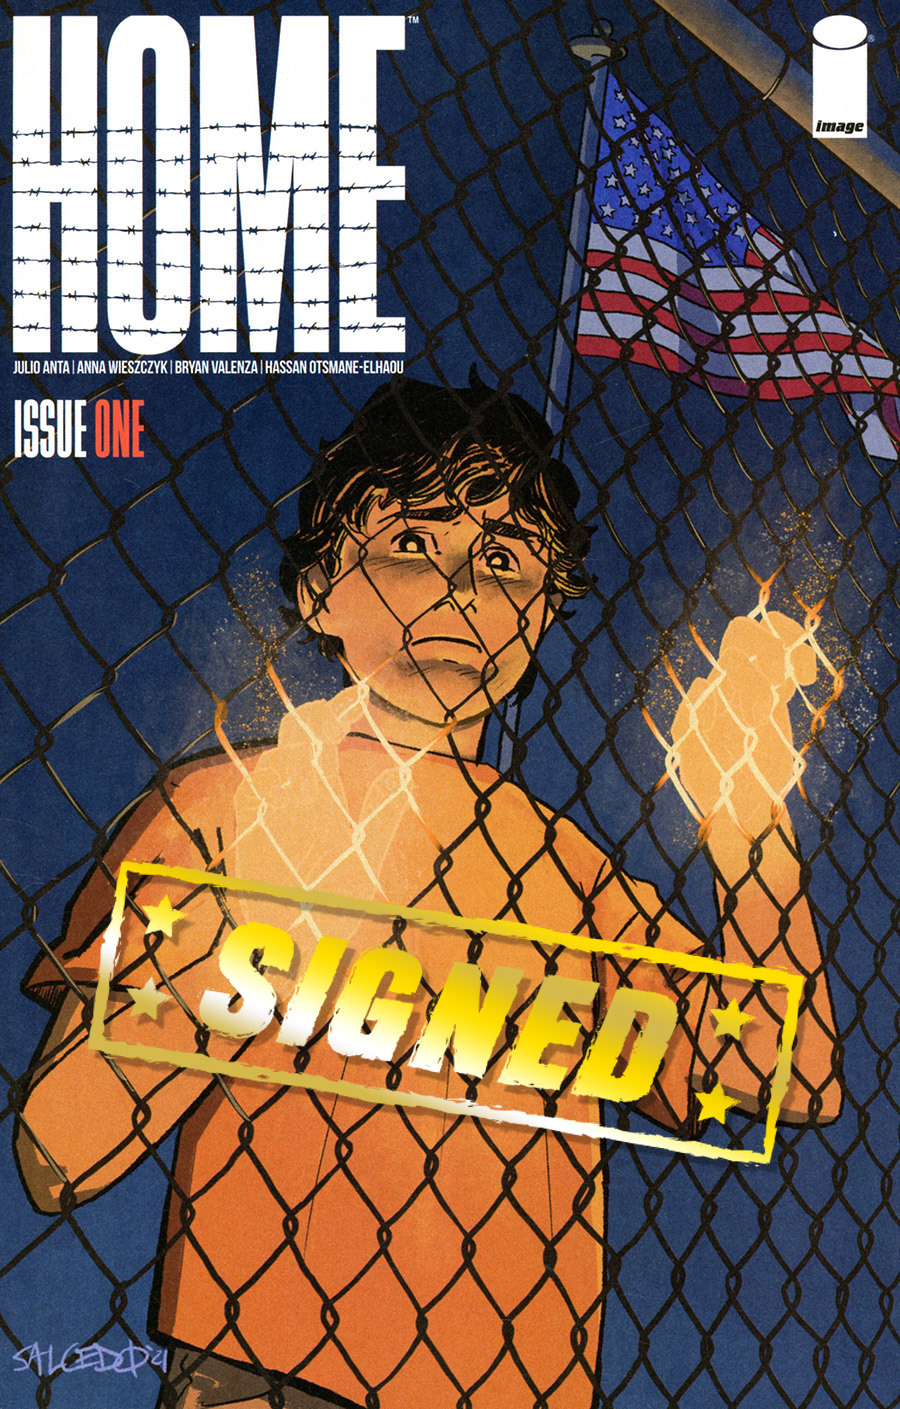 Home (Image Comics) #1 Cover D Variant Jacoby Salcedo Cover Signed By Julio Anta